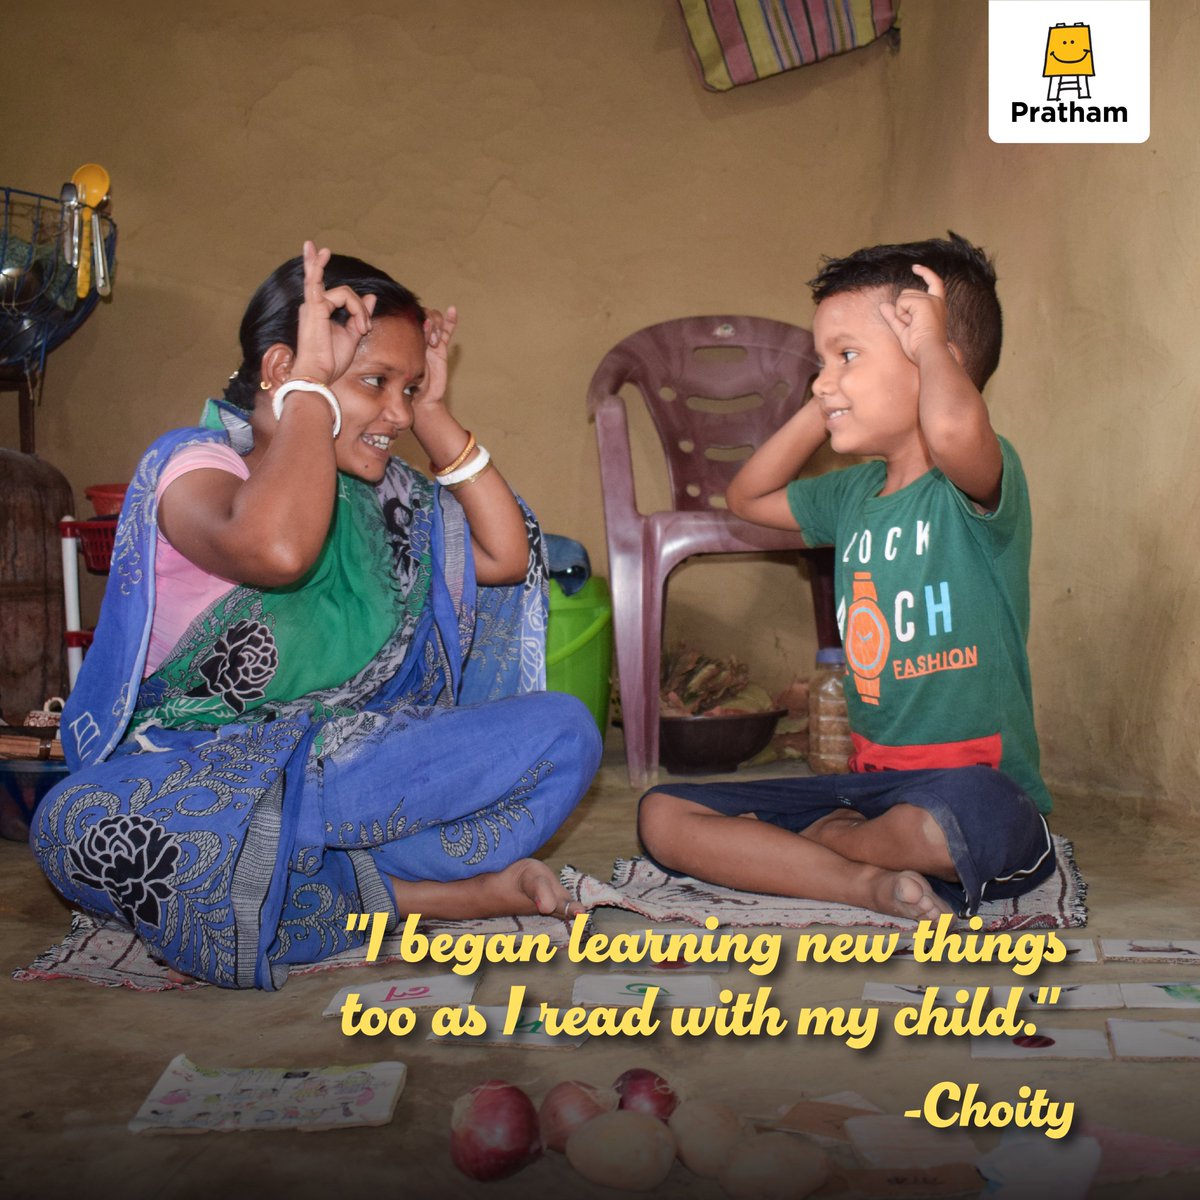 Pratham wishes all the incredible mothers a Happy Mother's Day! As the first teacher of their lives, mothers impart foundational knowledge to their children, helping them navigate life's challenges. Here's to celebrating the role that mothers play in nurturing young minds.